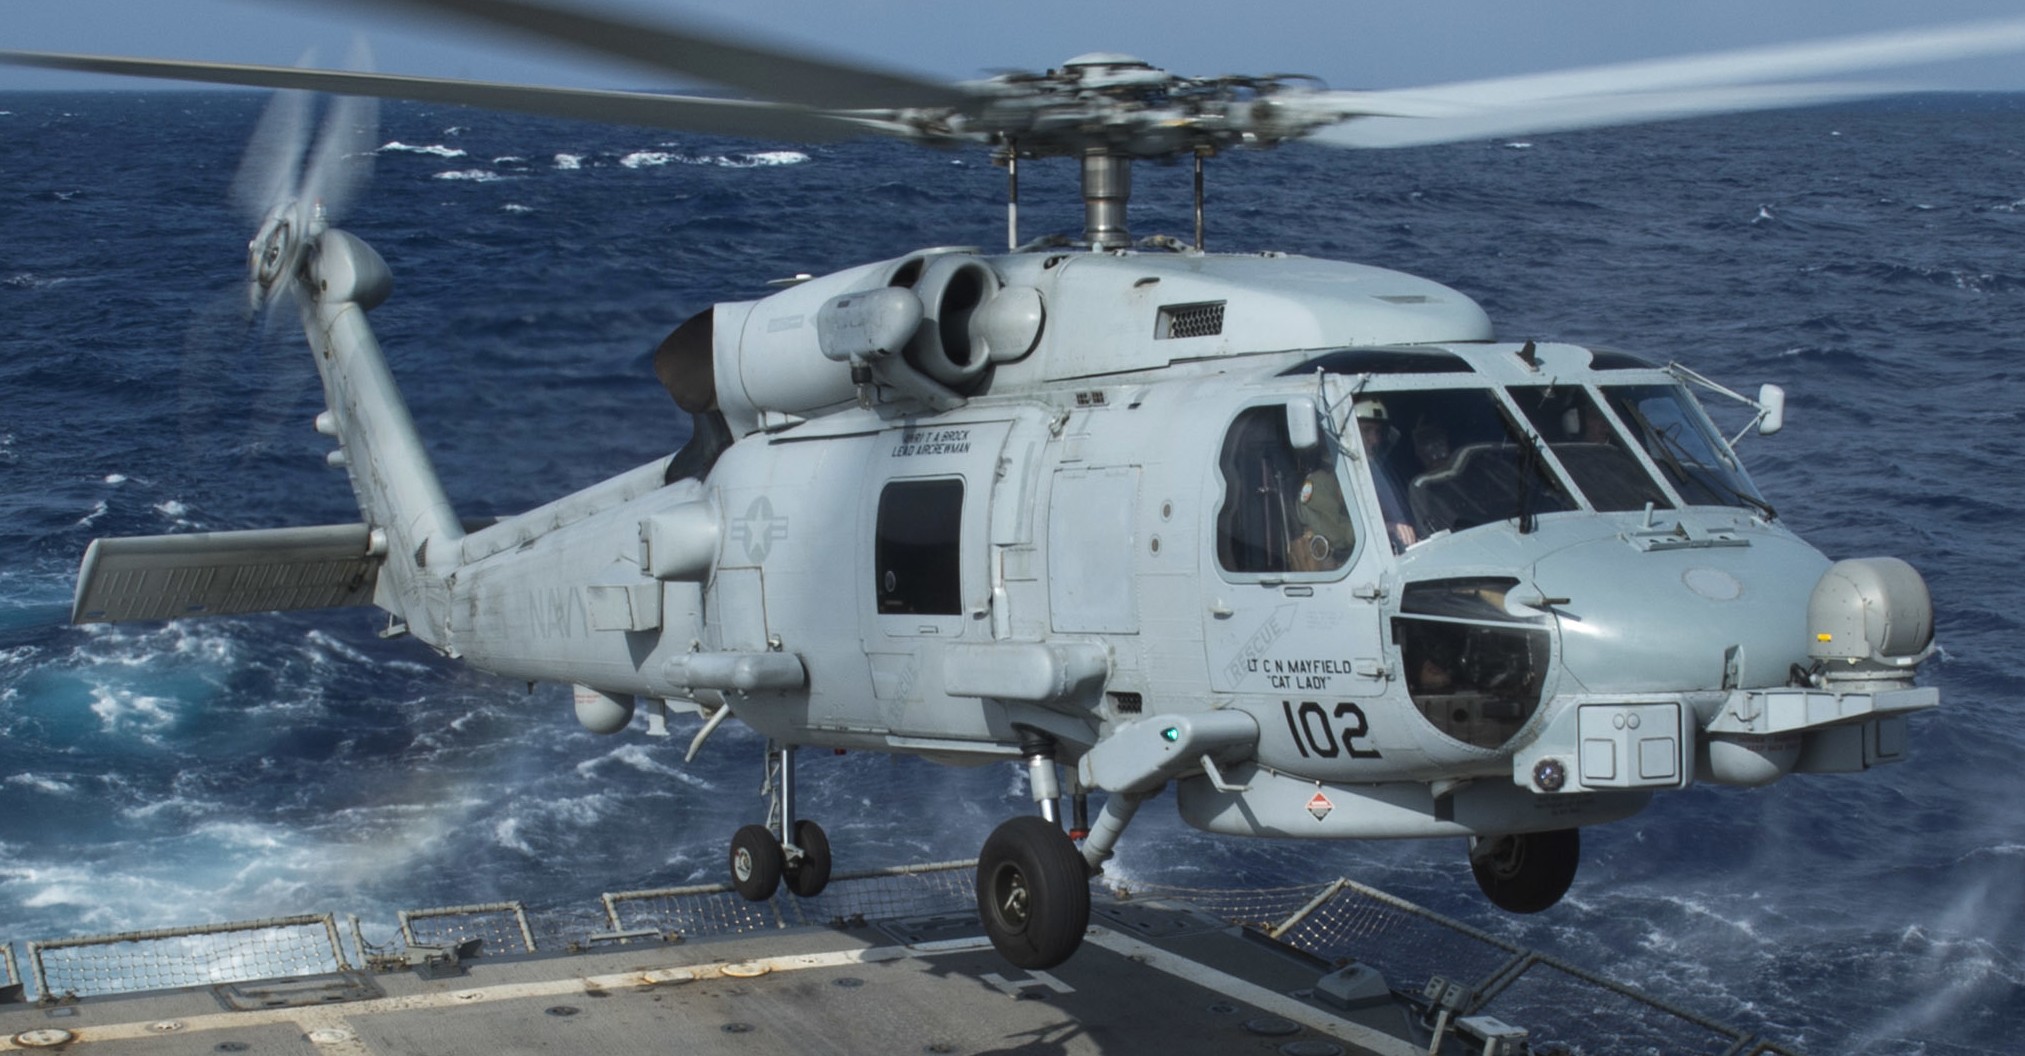 hsm-49 scorpions helicopter maritime strike squadron mh-60r seahawk 2016 16 uss spruance ddg-111